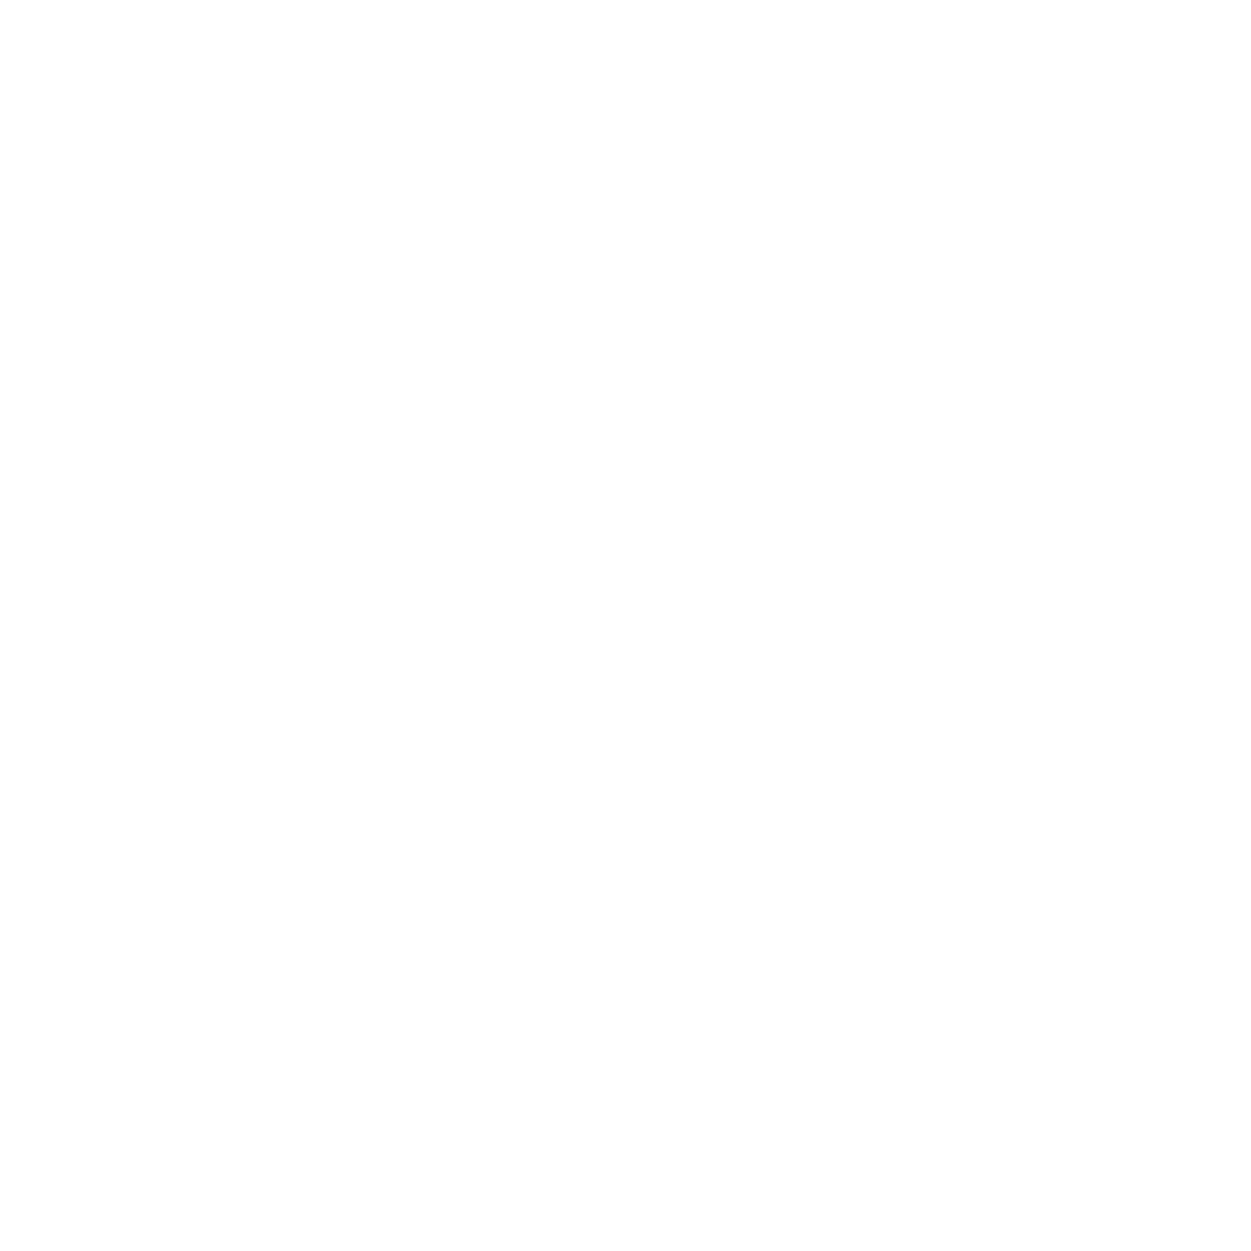 row of three  location symbols increasing in size with a star inside the largest symbol 